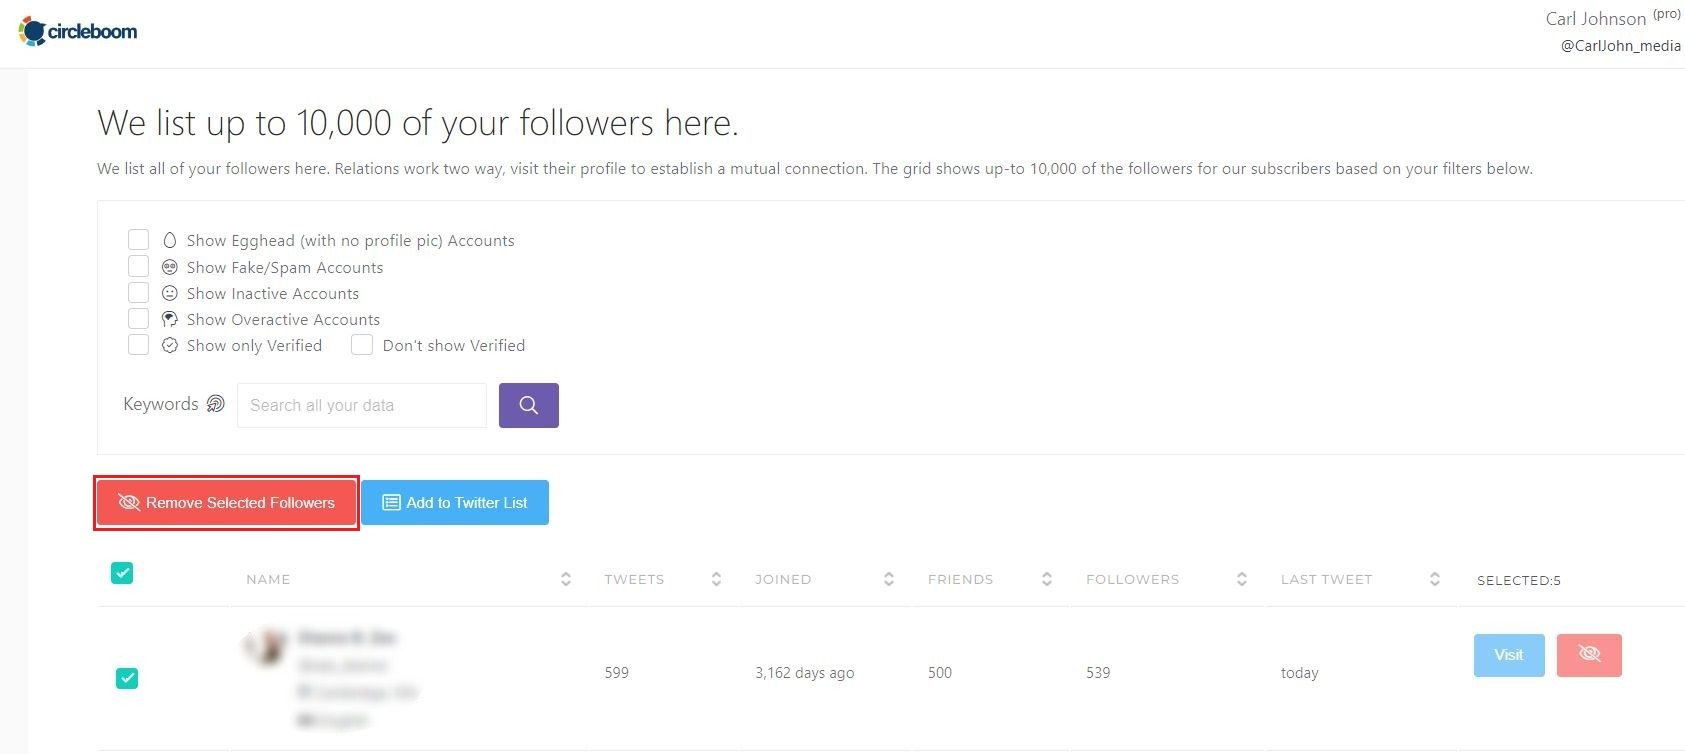 Circleboom dashboard displays how you choose your followers to force unfollow